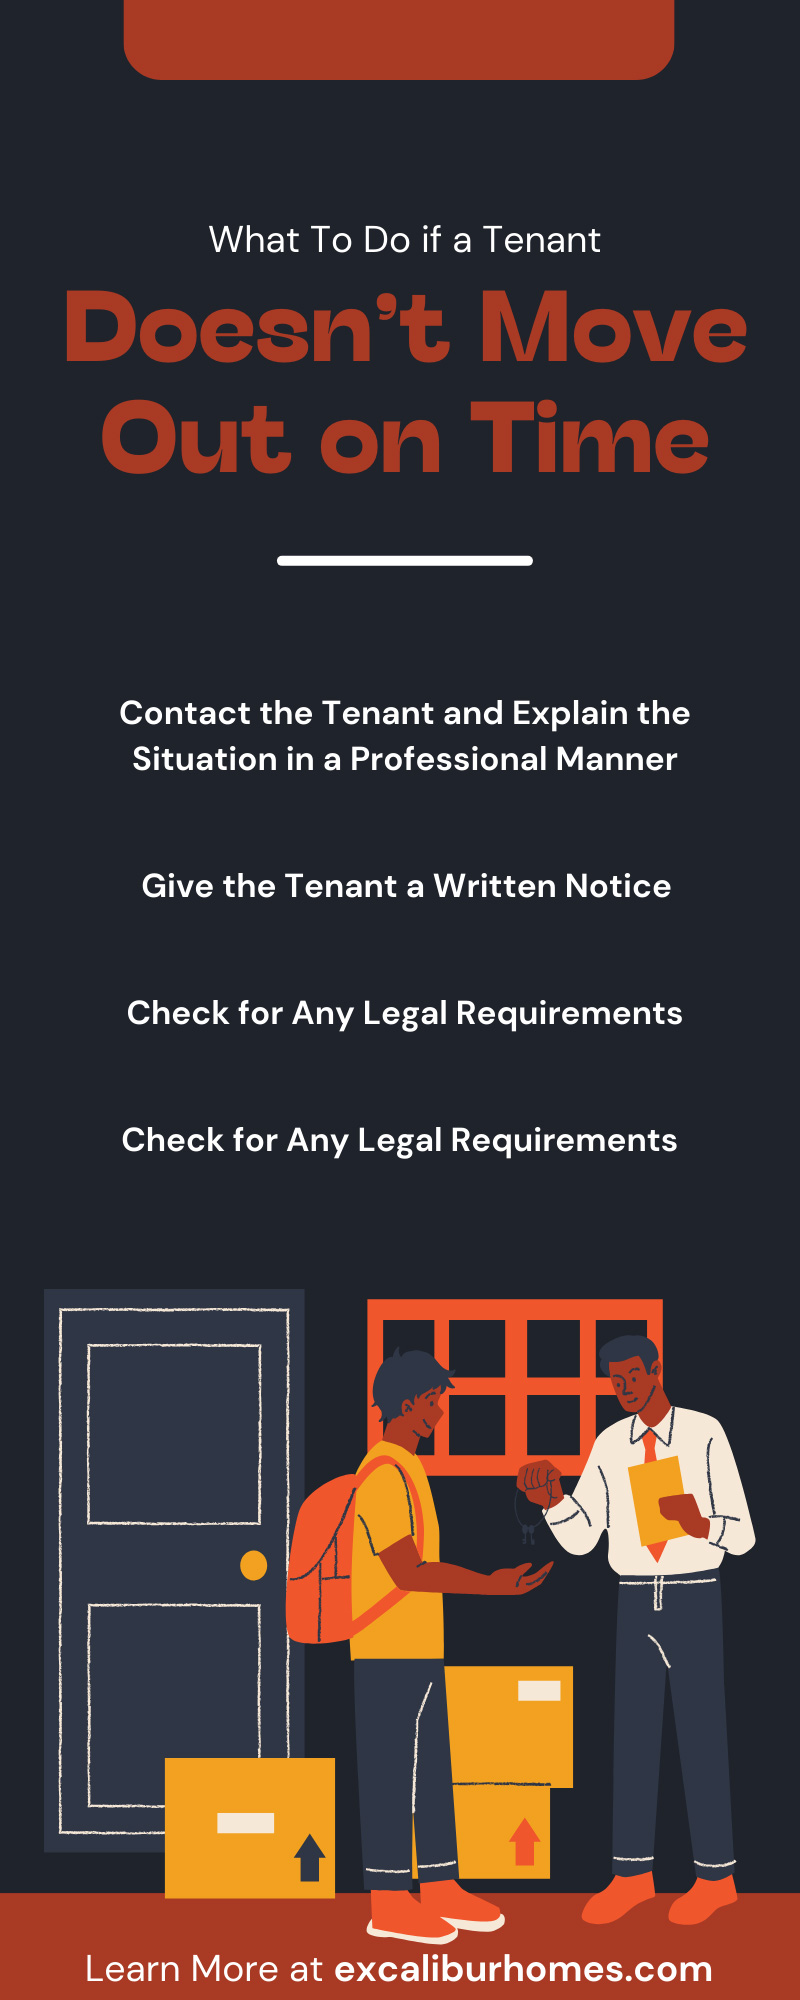 What To Do if a Tenant Doesn’t Move Out on Time